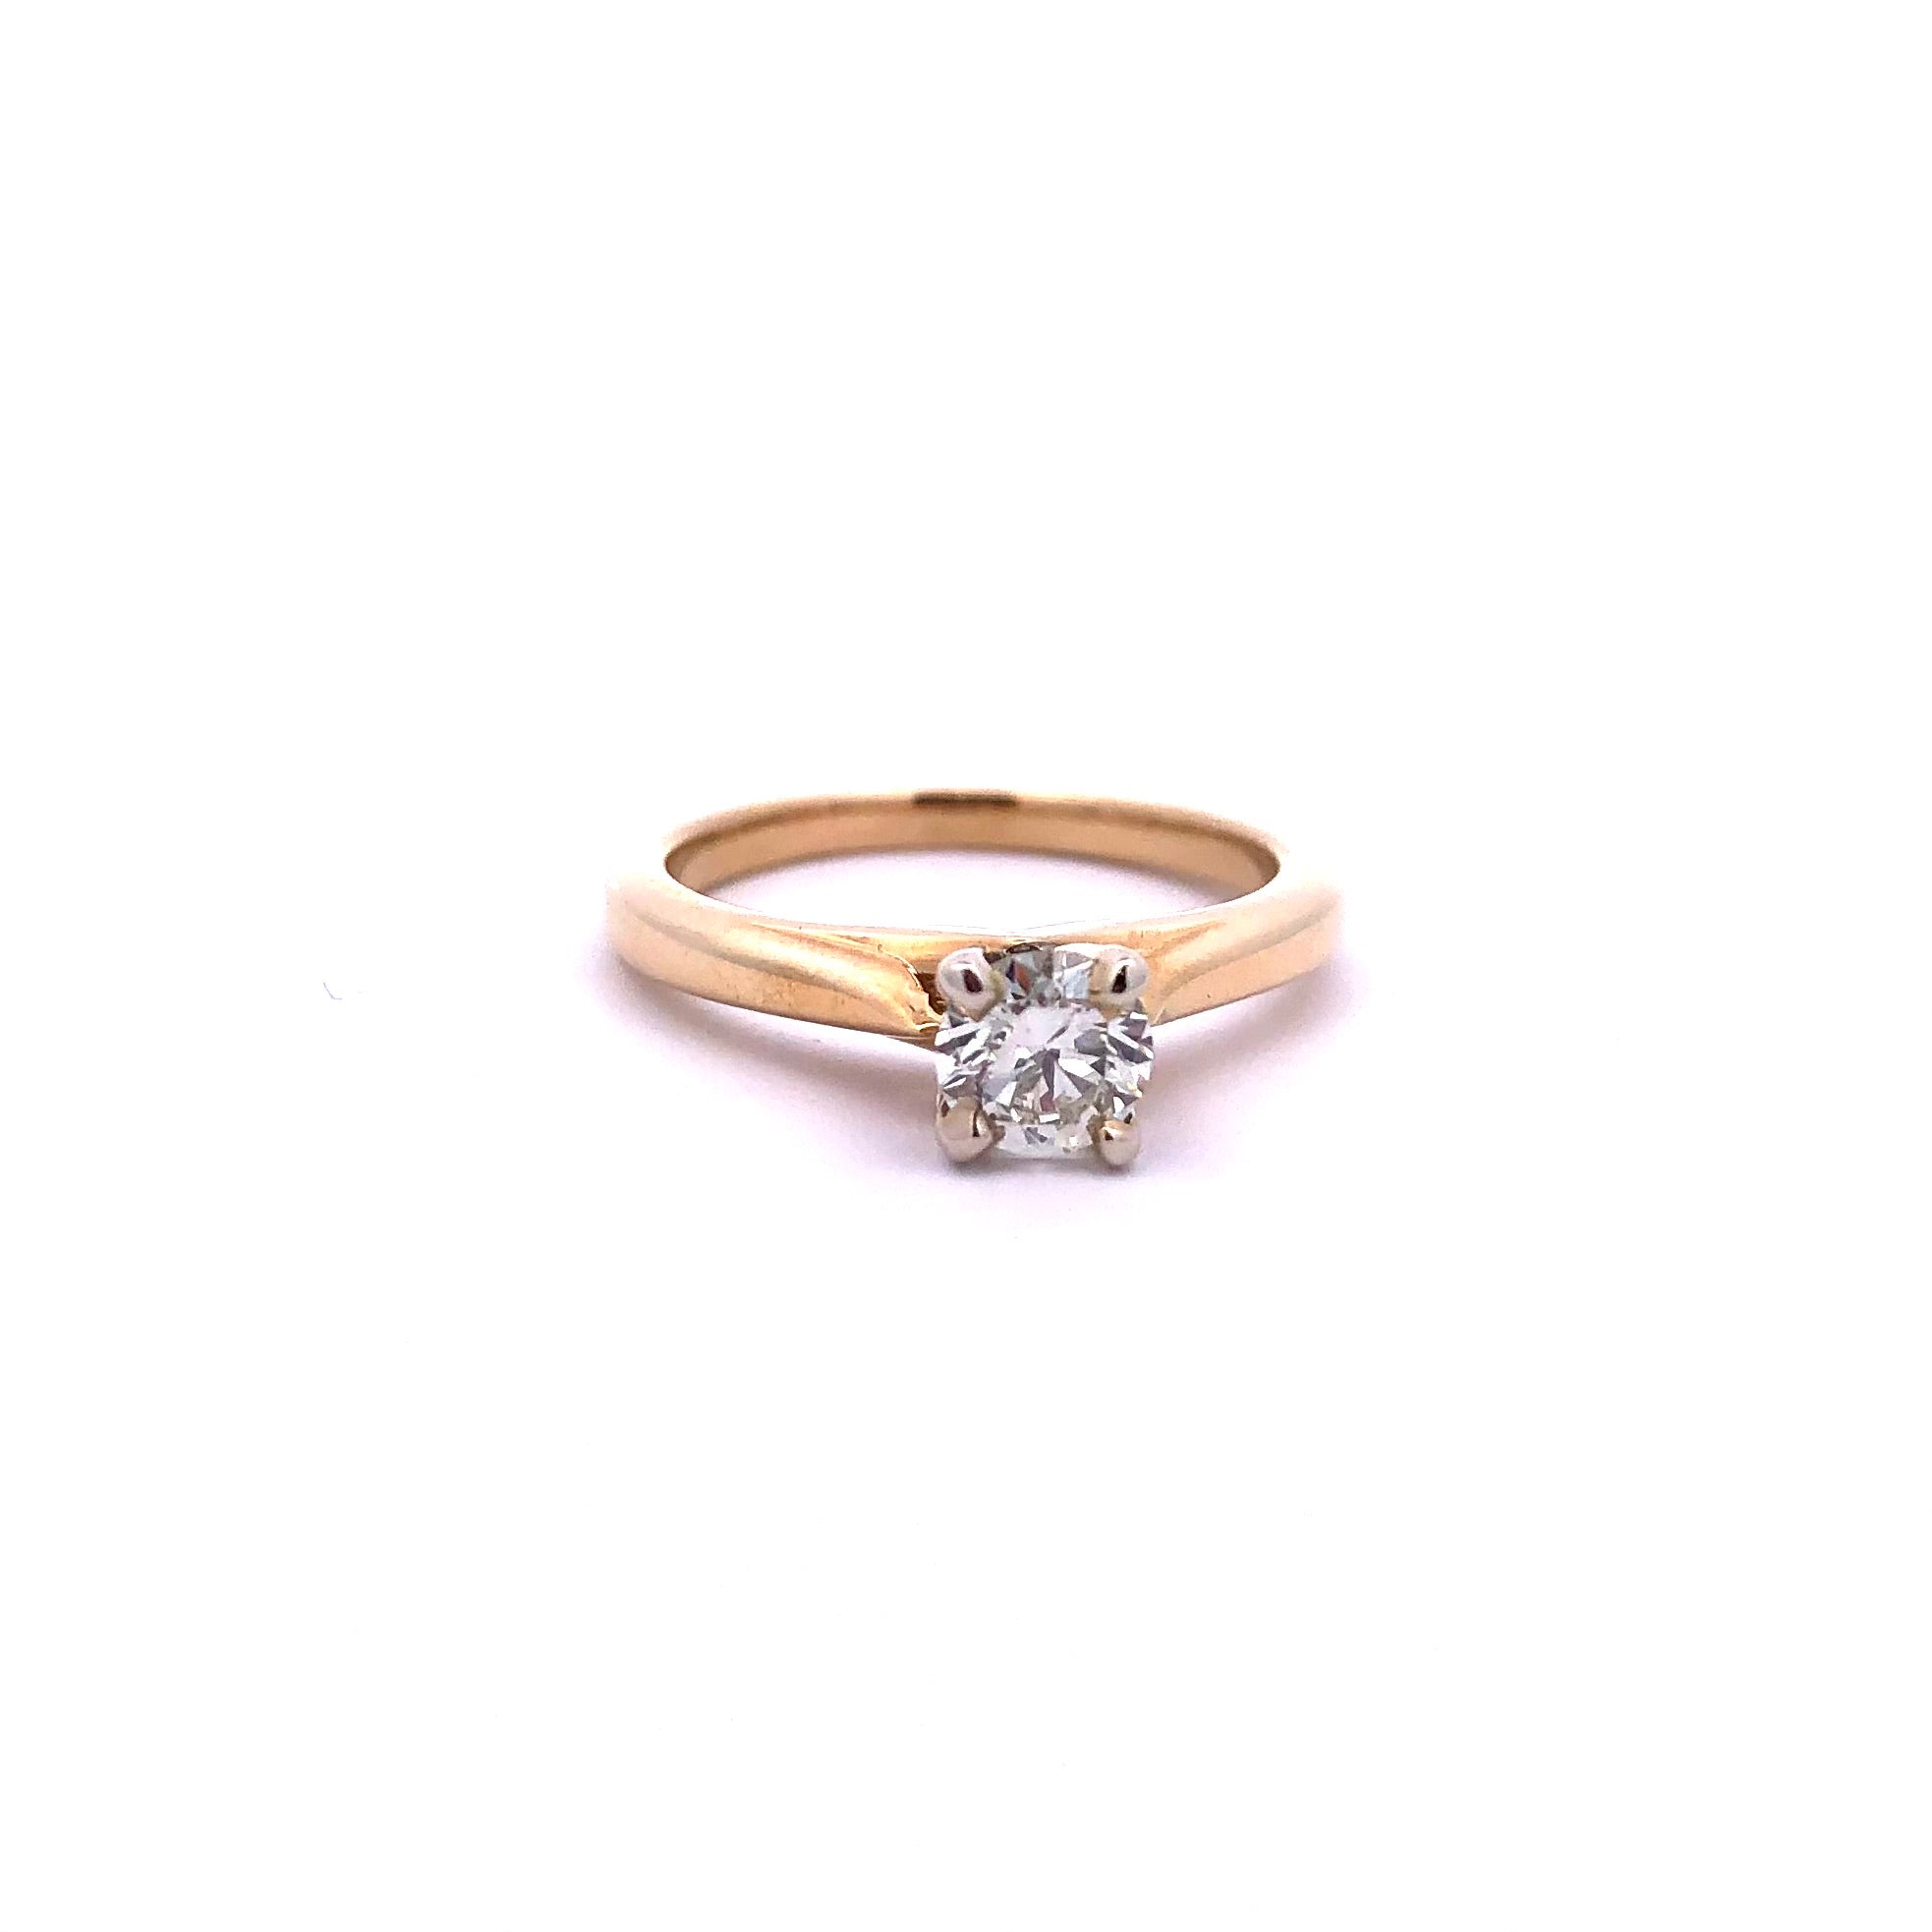 Estate 14KY 0.39ct Solitaire Diamond Engagement Ring